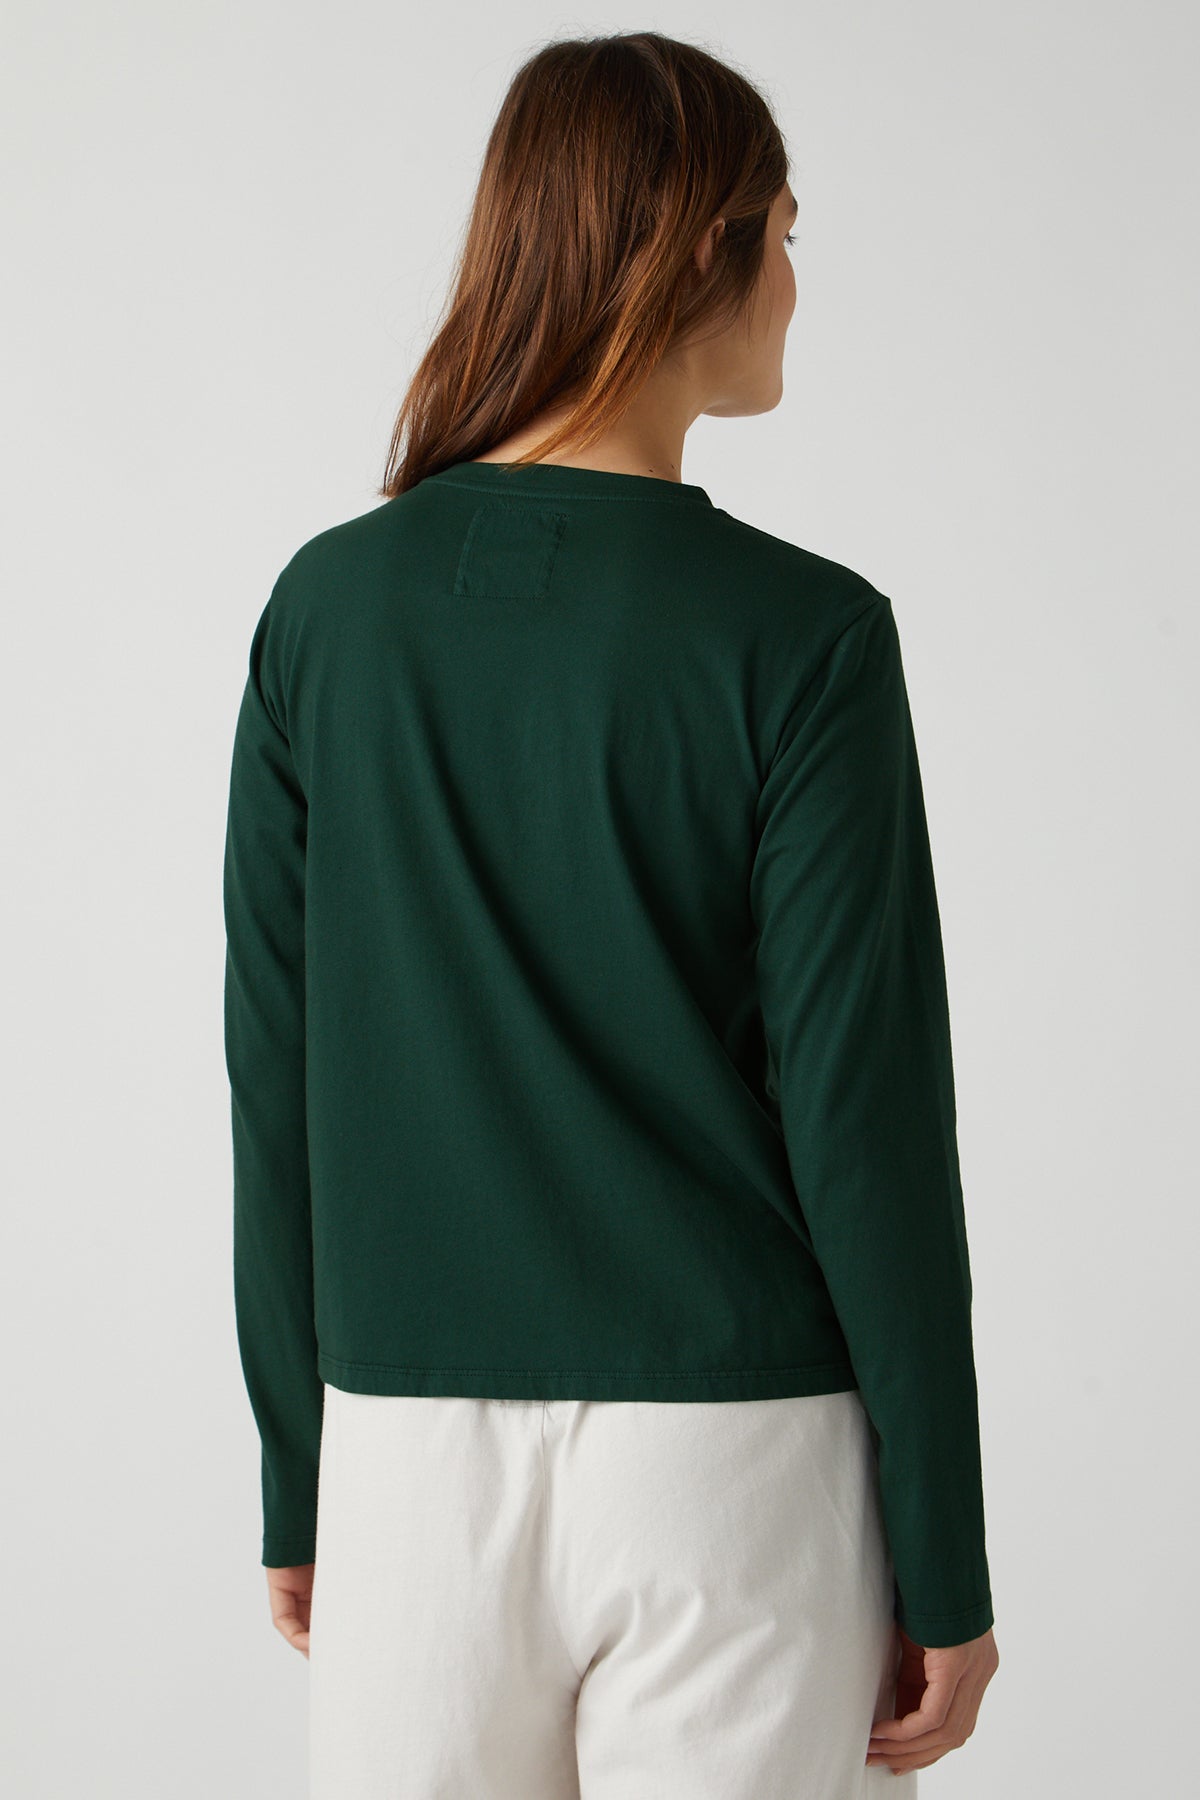 Vicente Tee in forest green back-25484347211969